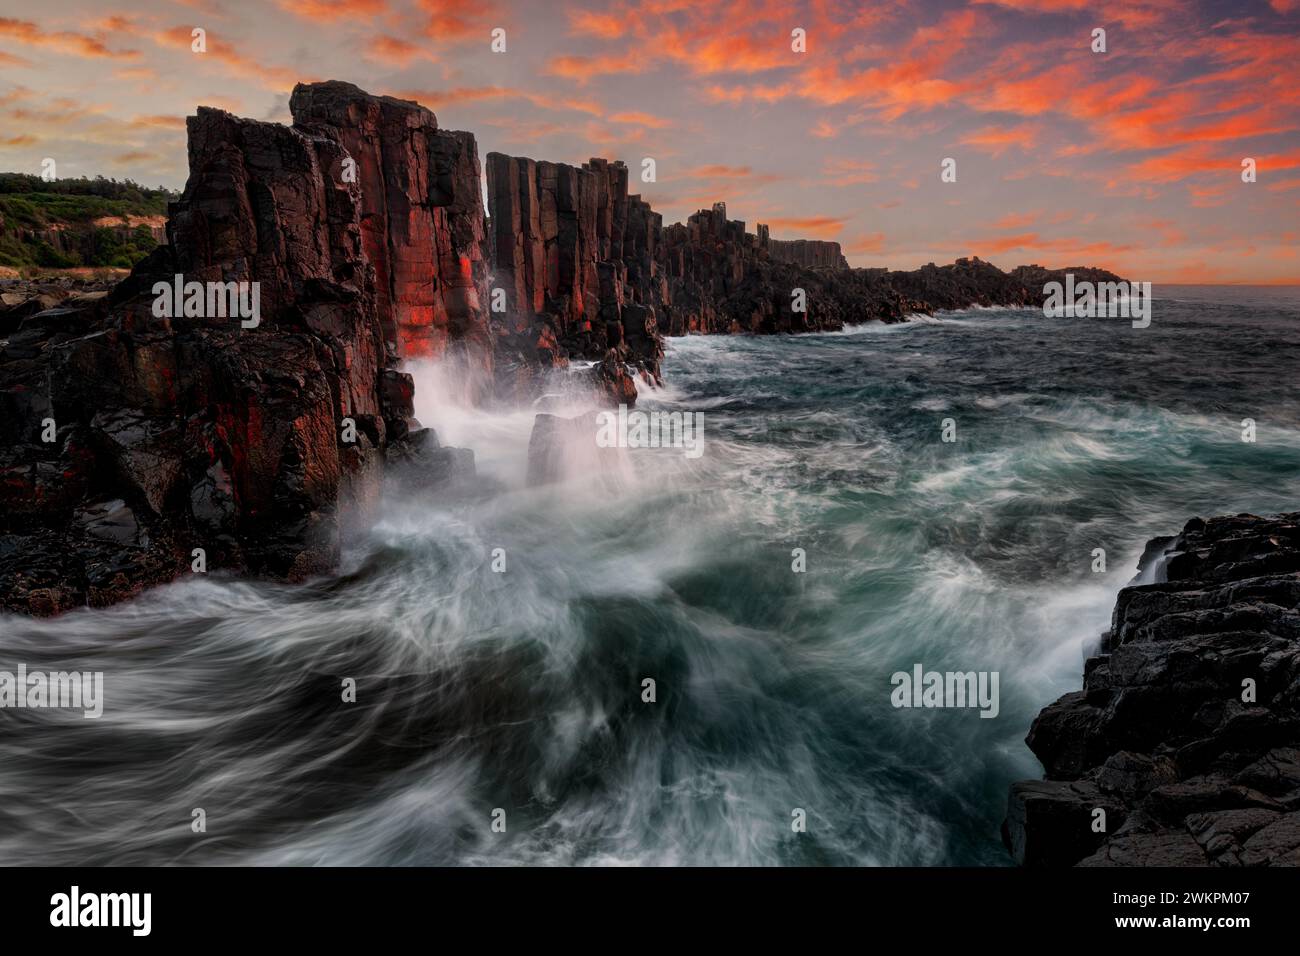 Outstanding geological rock formation of Bombe Quarry in Kiama, south of Sydney. Stock Photo